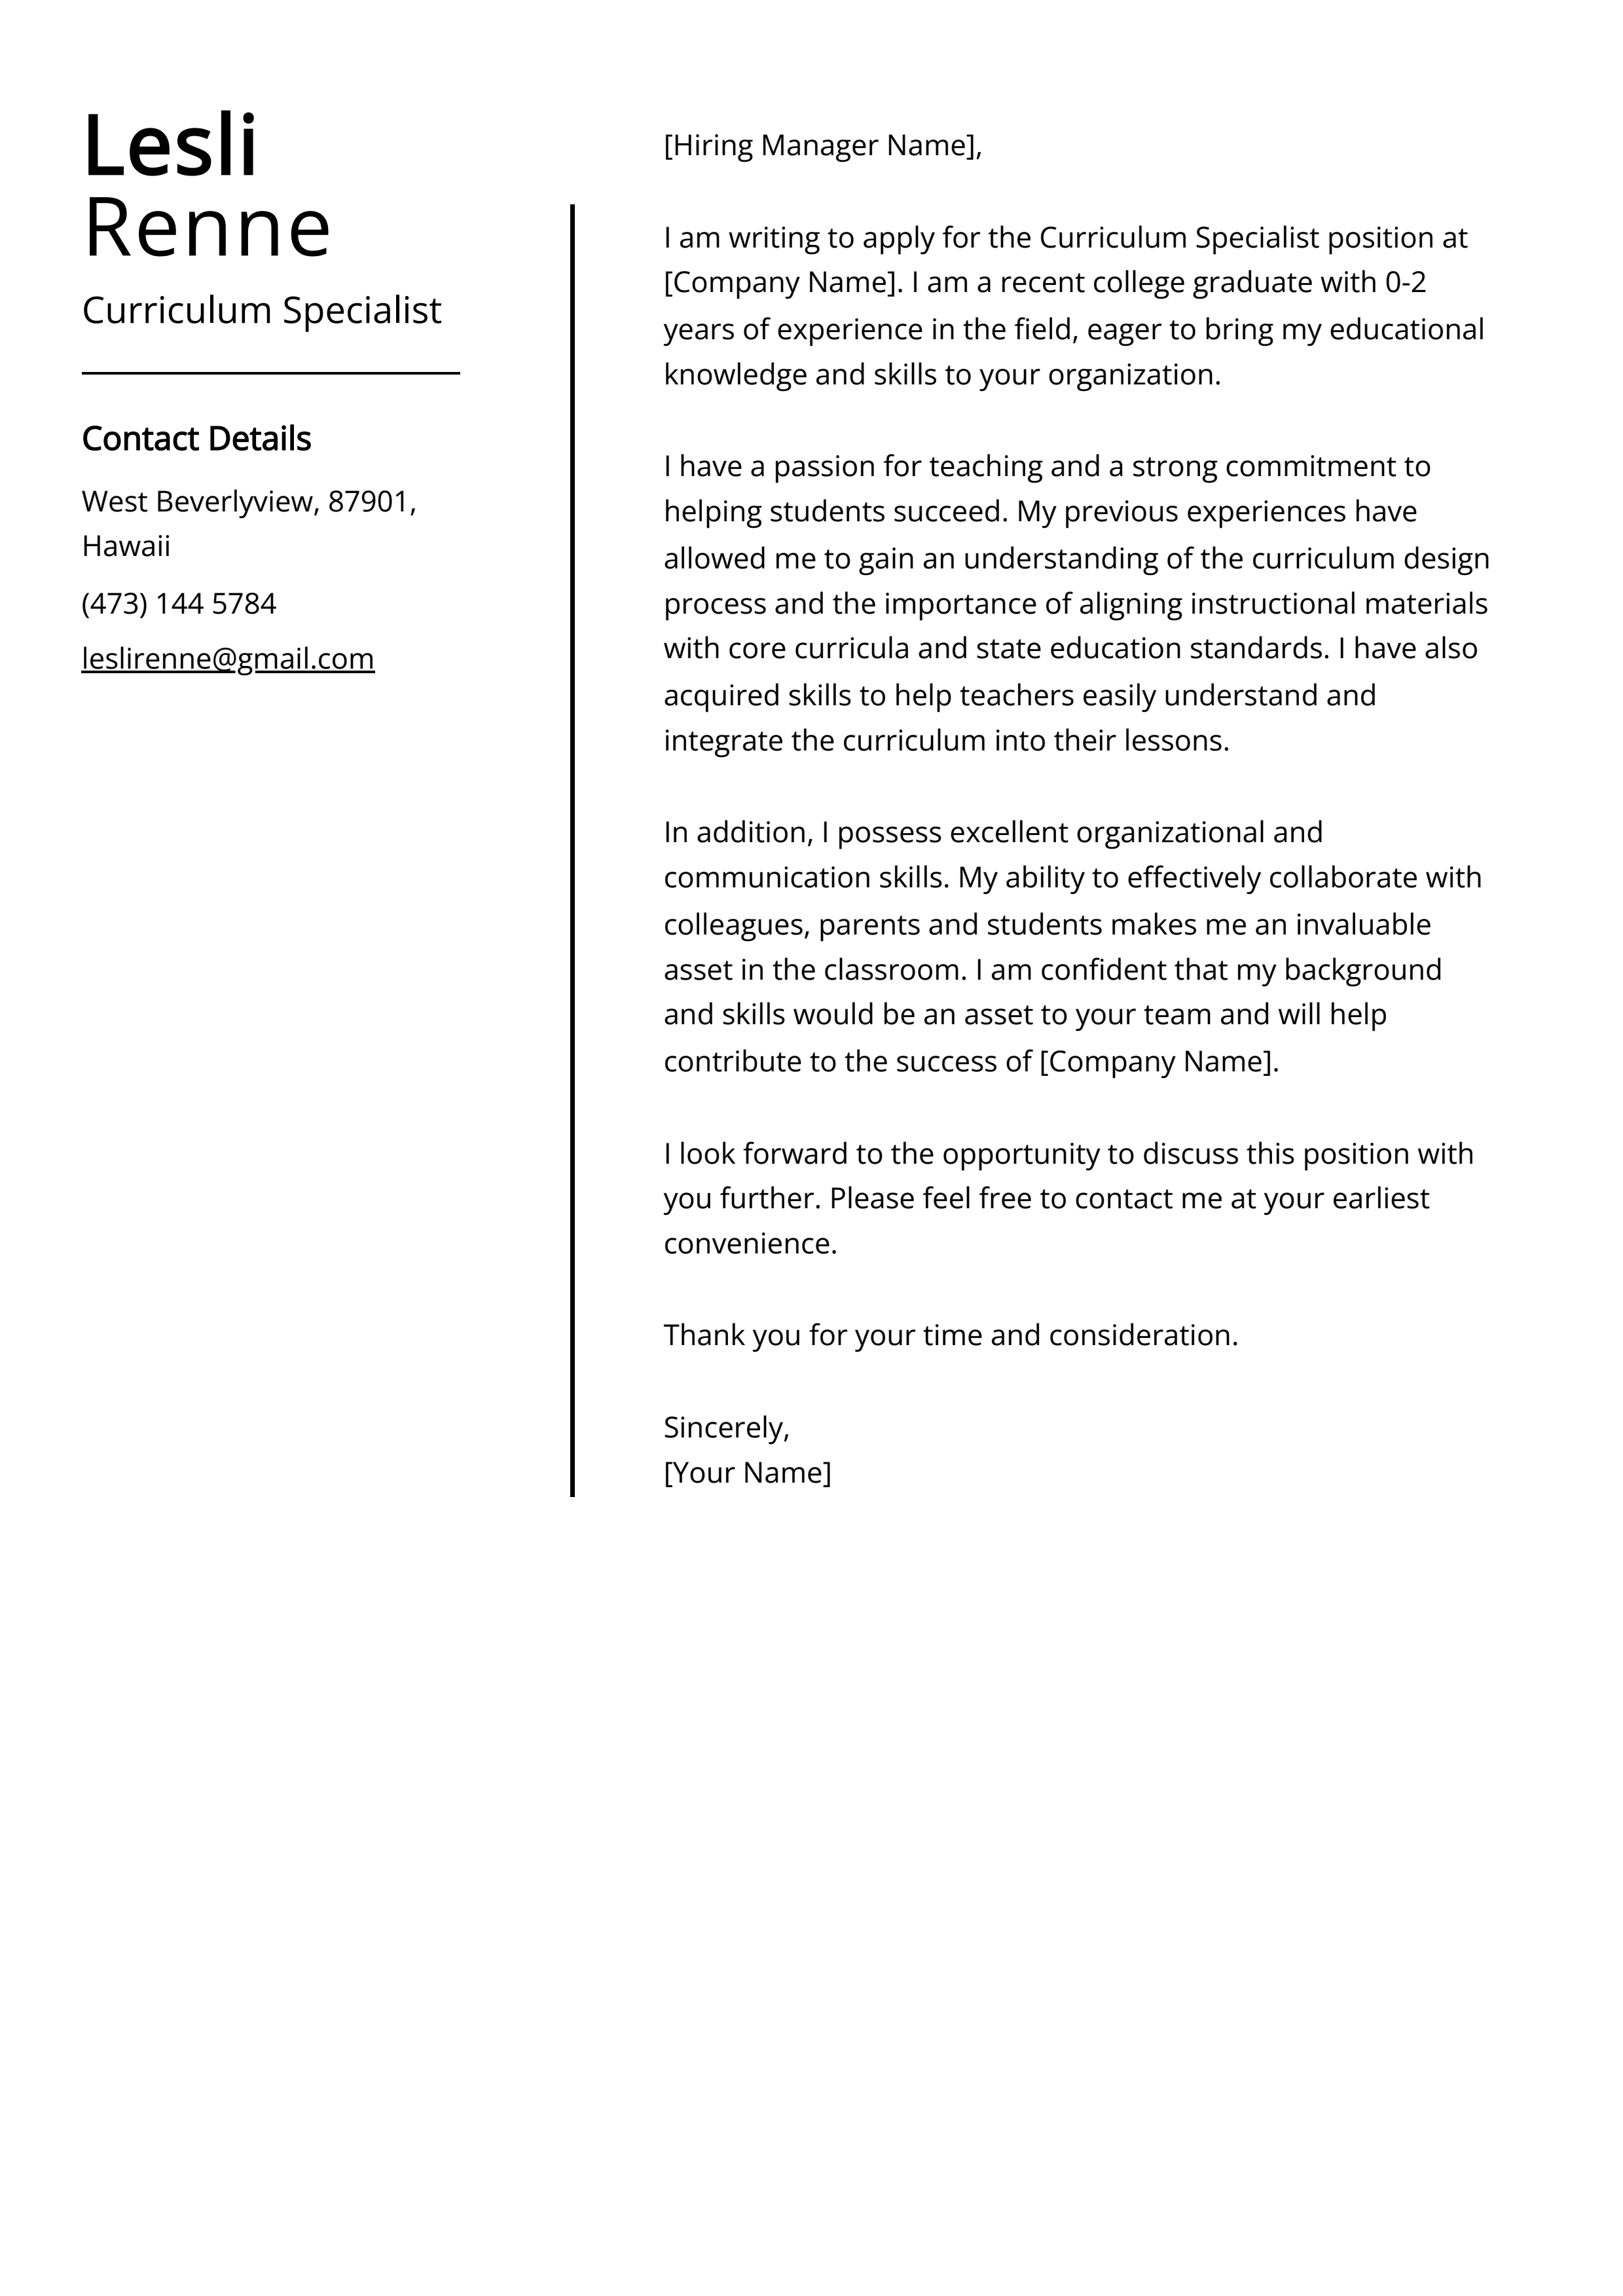 Curriculum Specialist Cover Letter Example